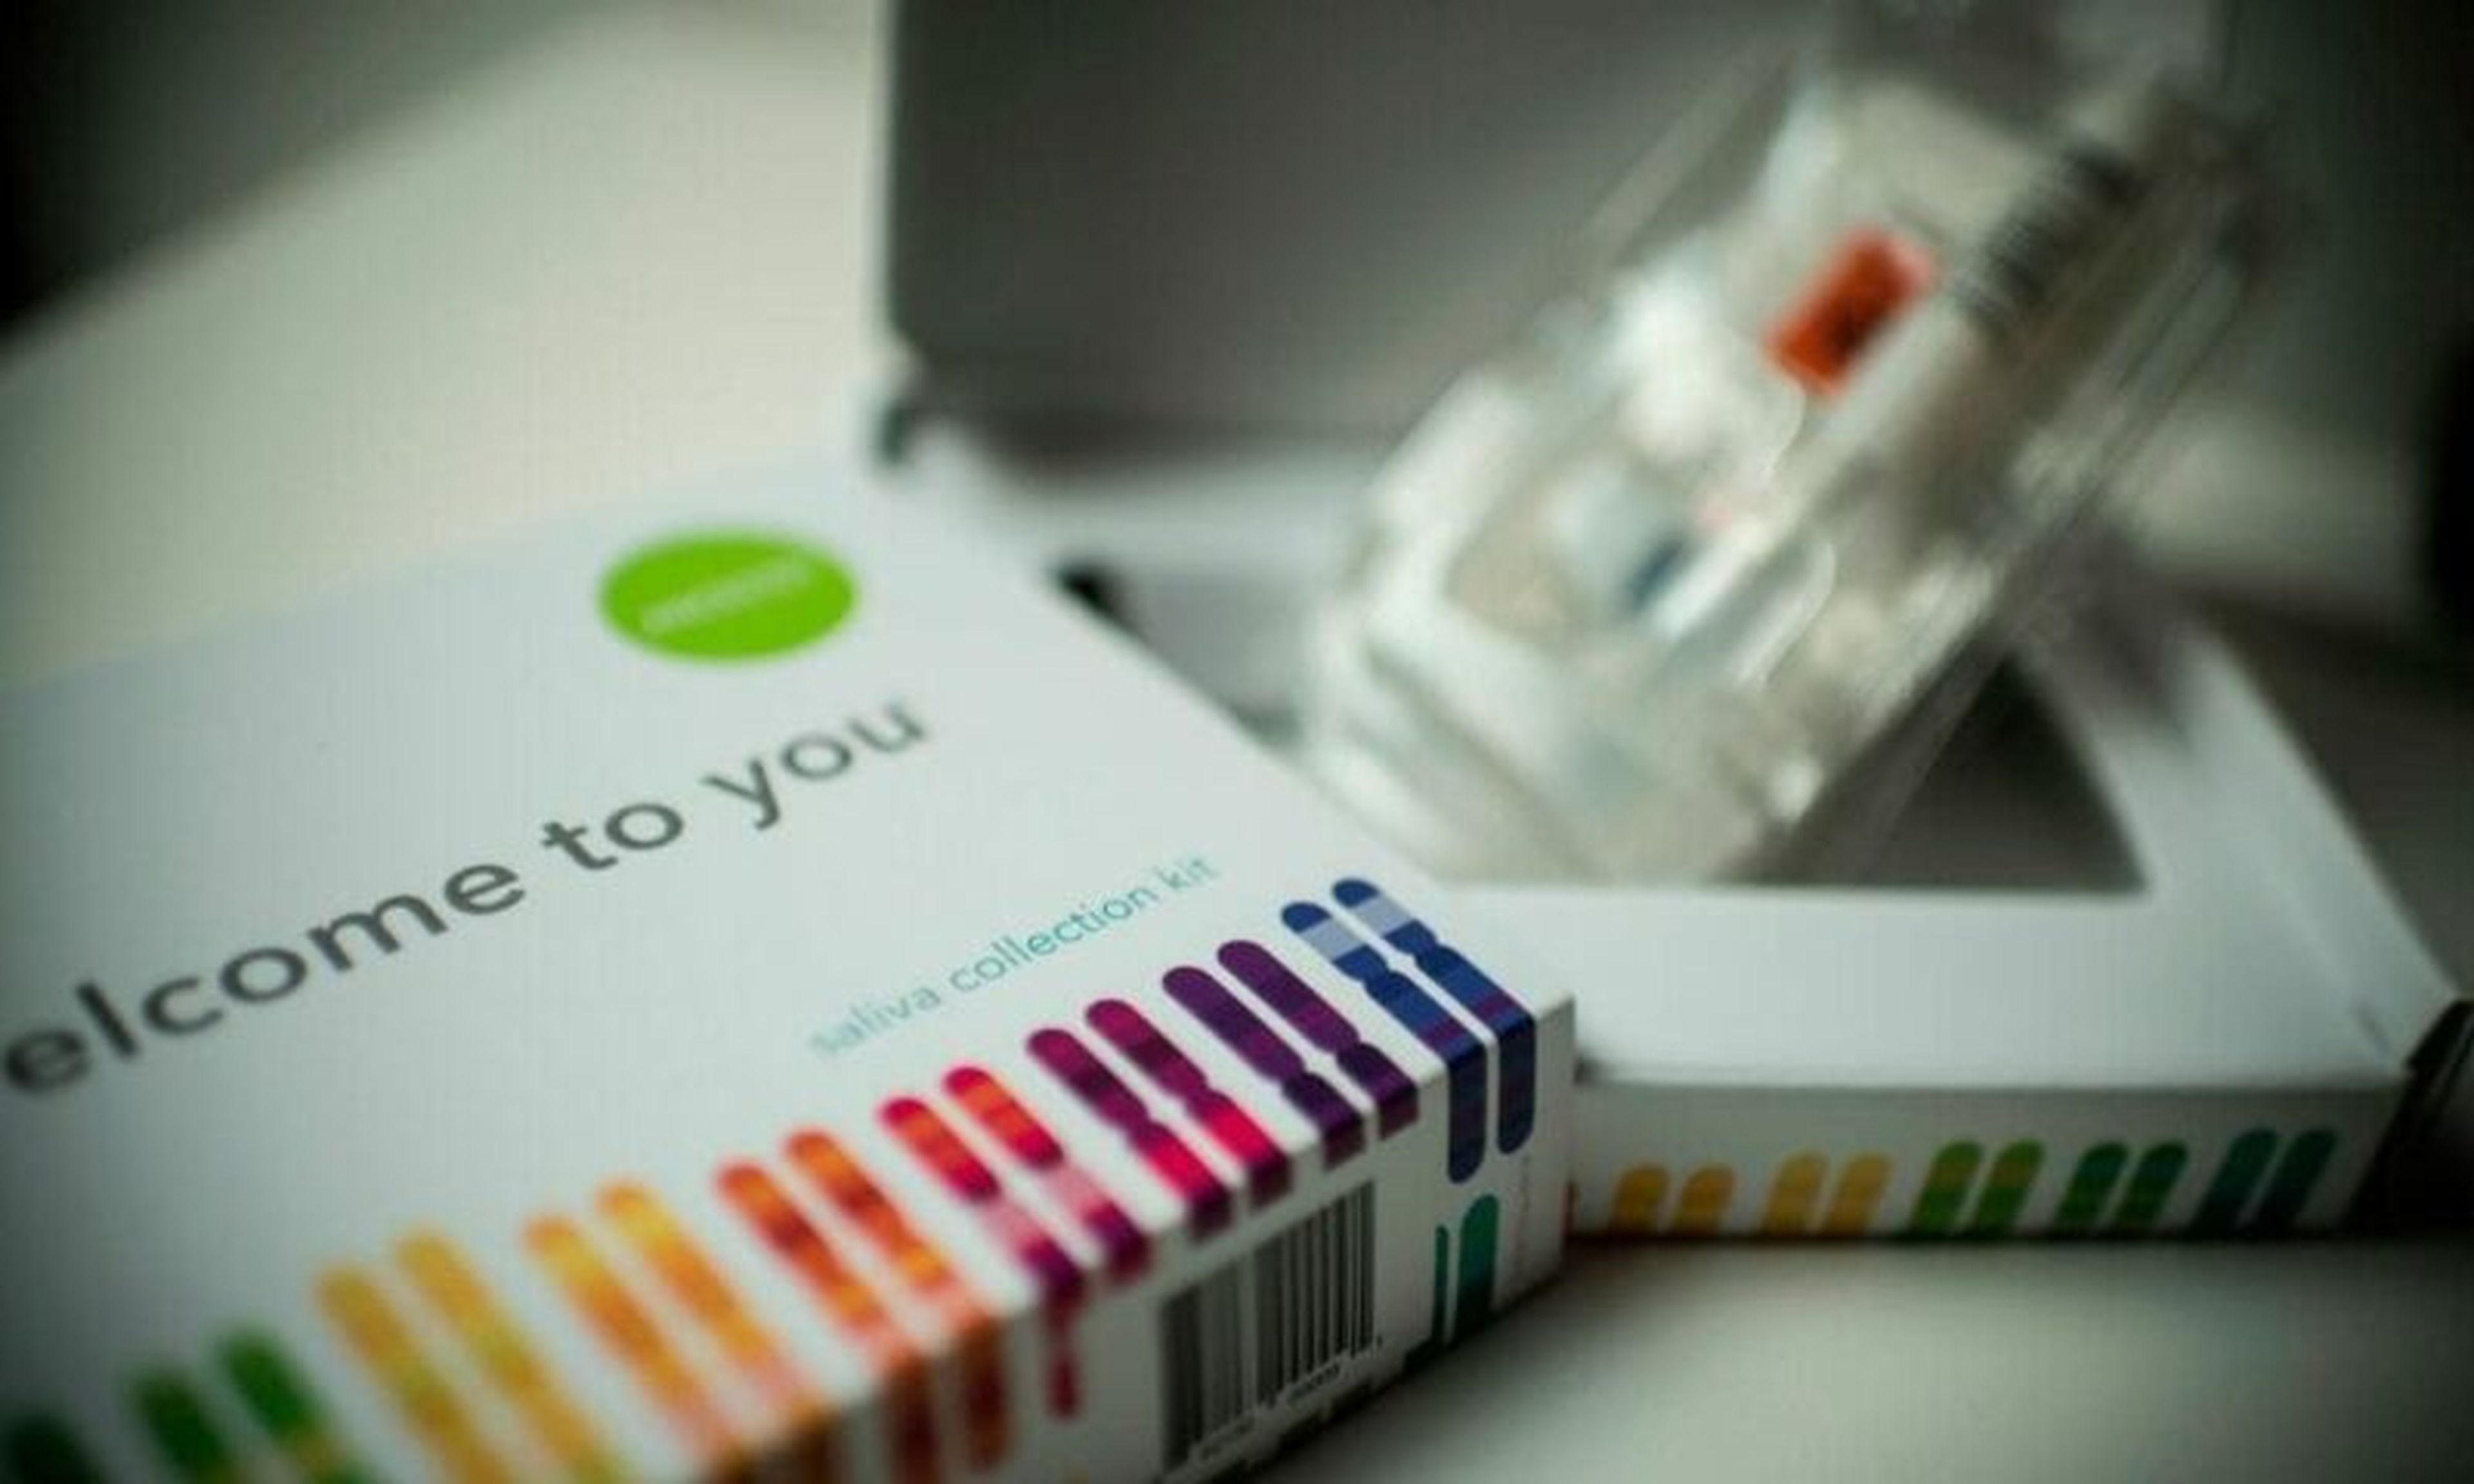 23andMe said users who &#8220;negligently recycled&#8221; their passwords are to blame for the data leak that affected 6.9 million 23andMe customers in October. (Eric Baradat/AFP via Getty Images)